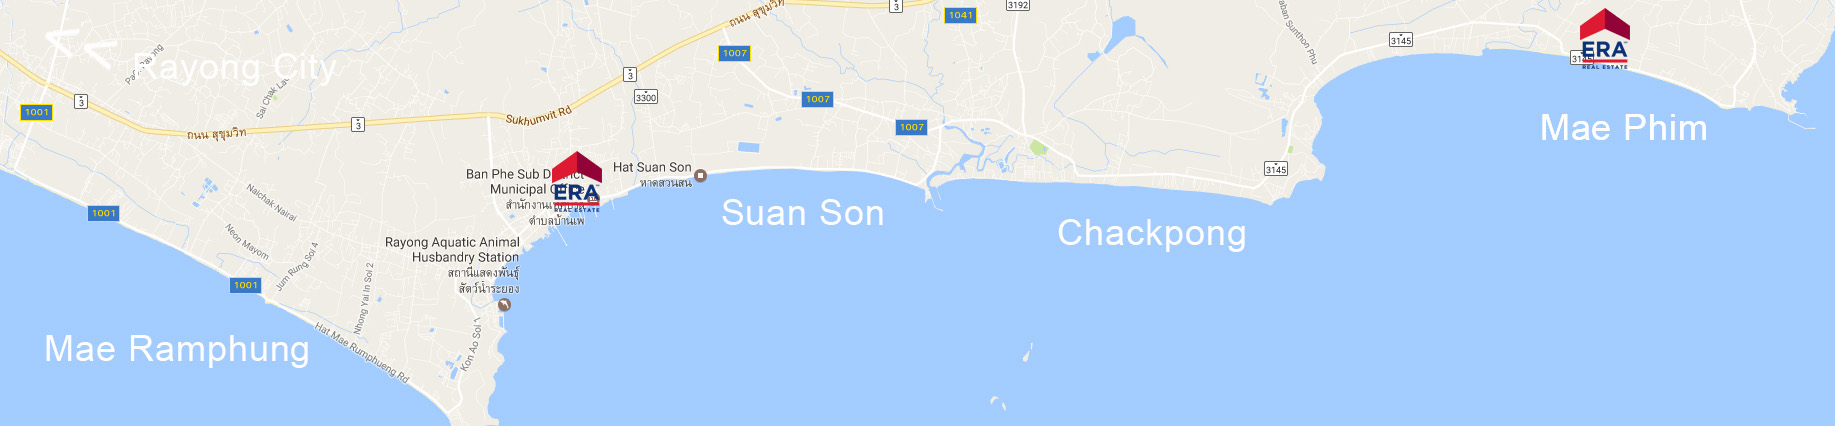 map of rayong coast line with names of beaches